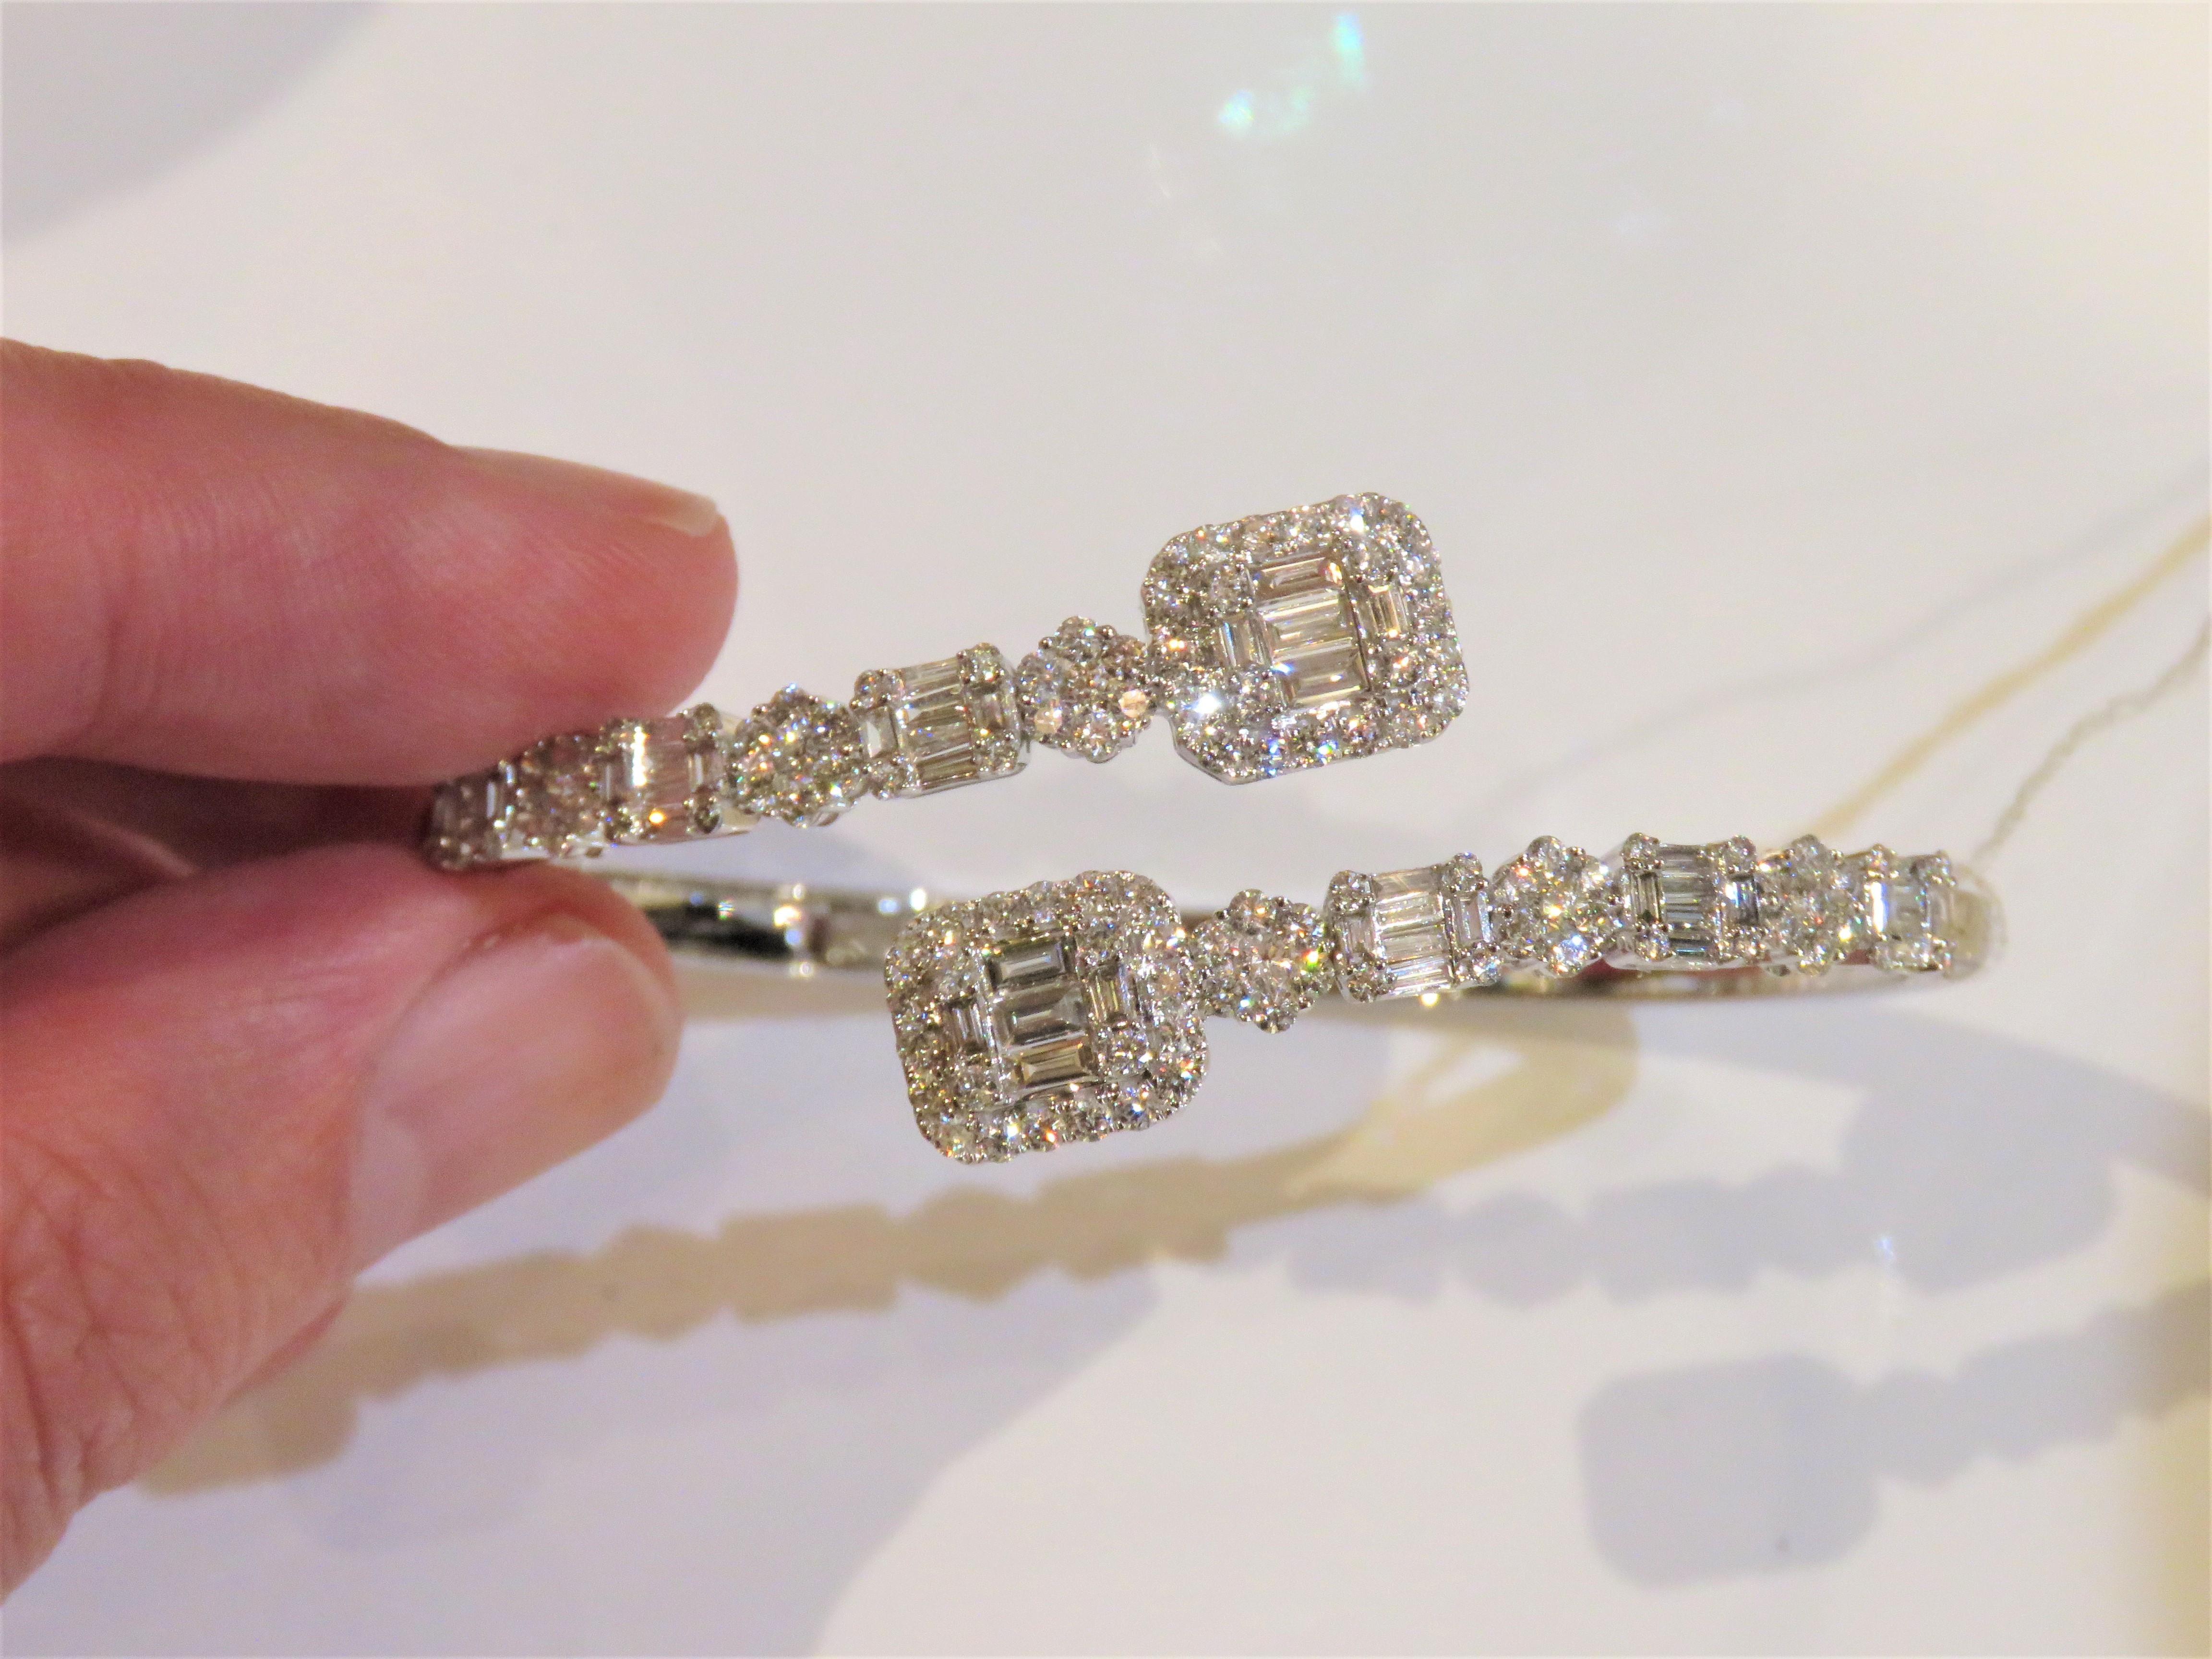 The Following Item we are offering is a Rare Important Radiant 18KT Gold Large Magnficent Rare Fancy Gorgeous Diamond Crossover Bangle Bracelet. Bangle is comprised of Exquisite Fancy Magnificent Baguette Cut and Round Diamonds!!! T.C.W. Approx